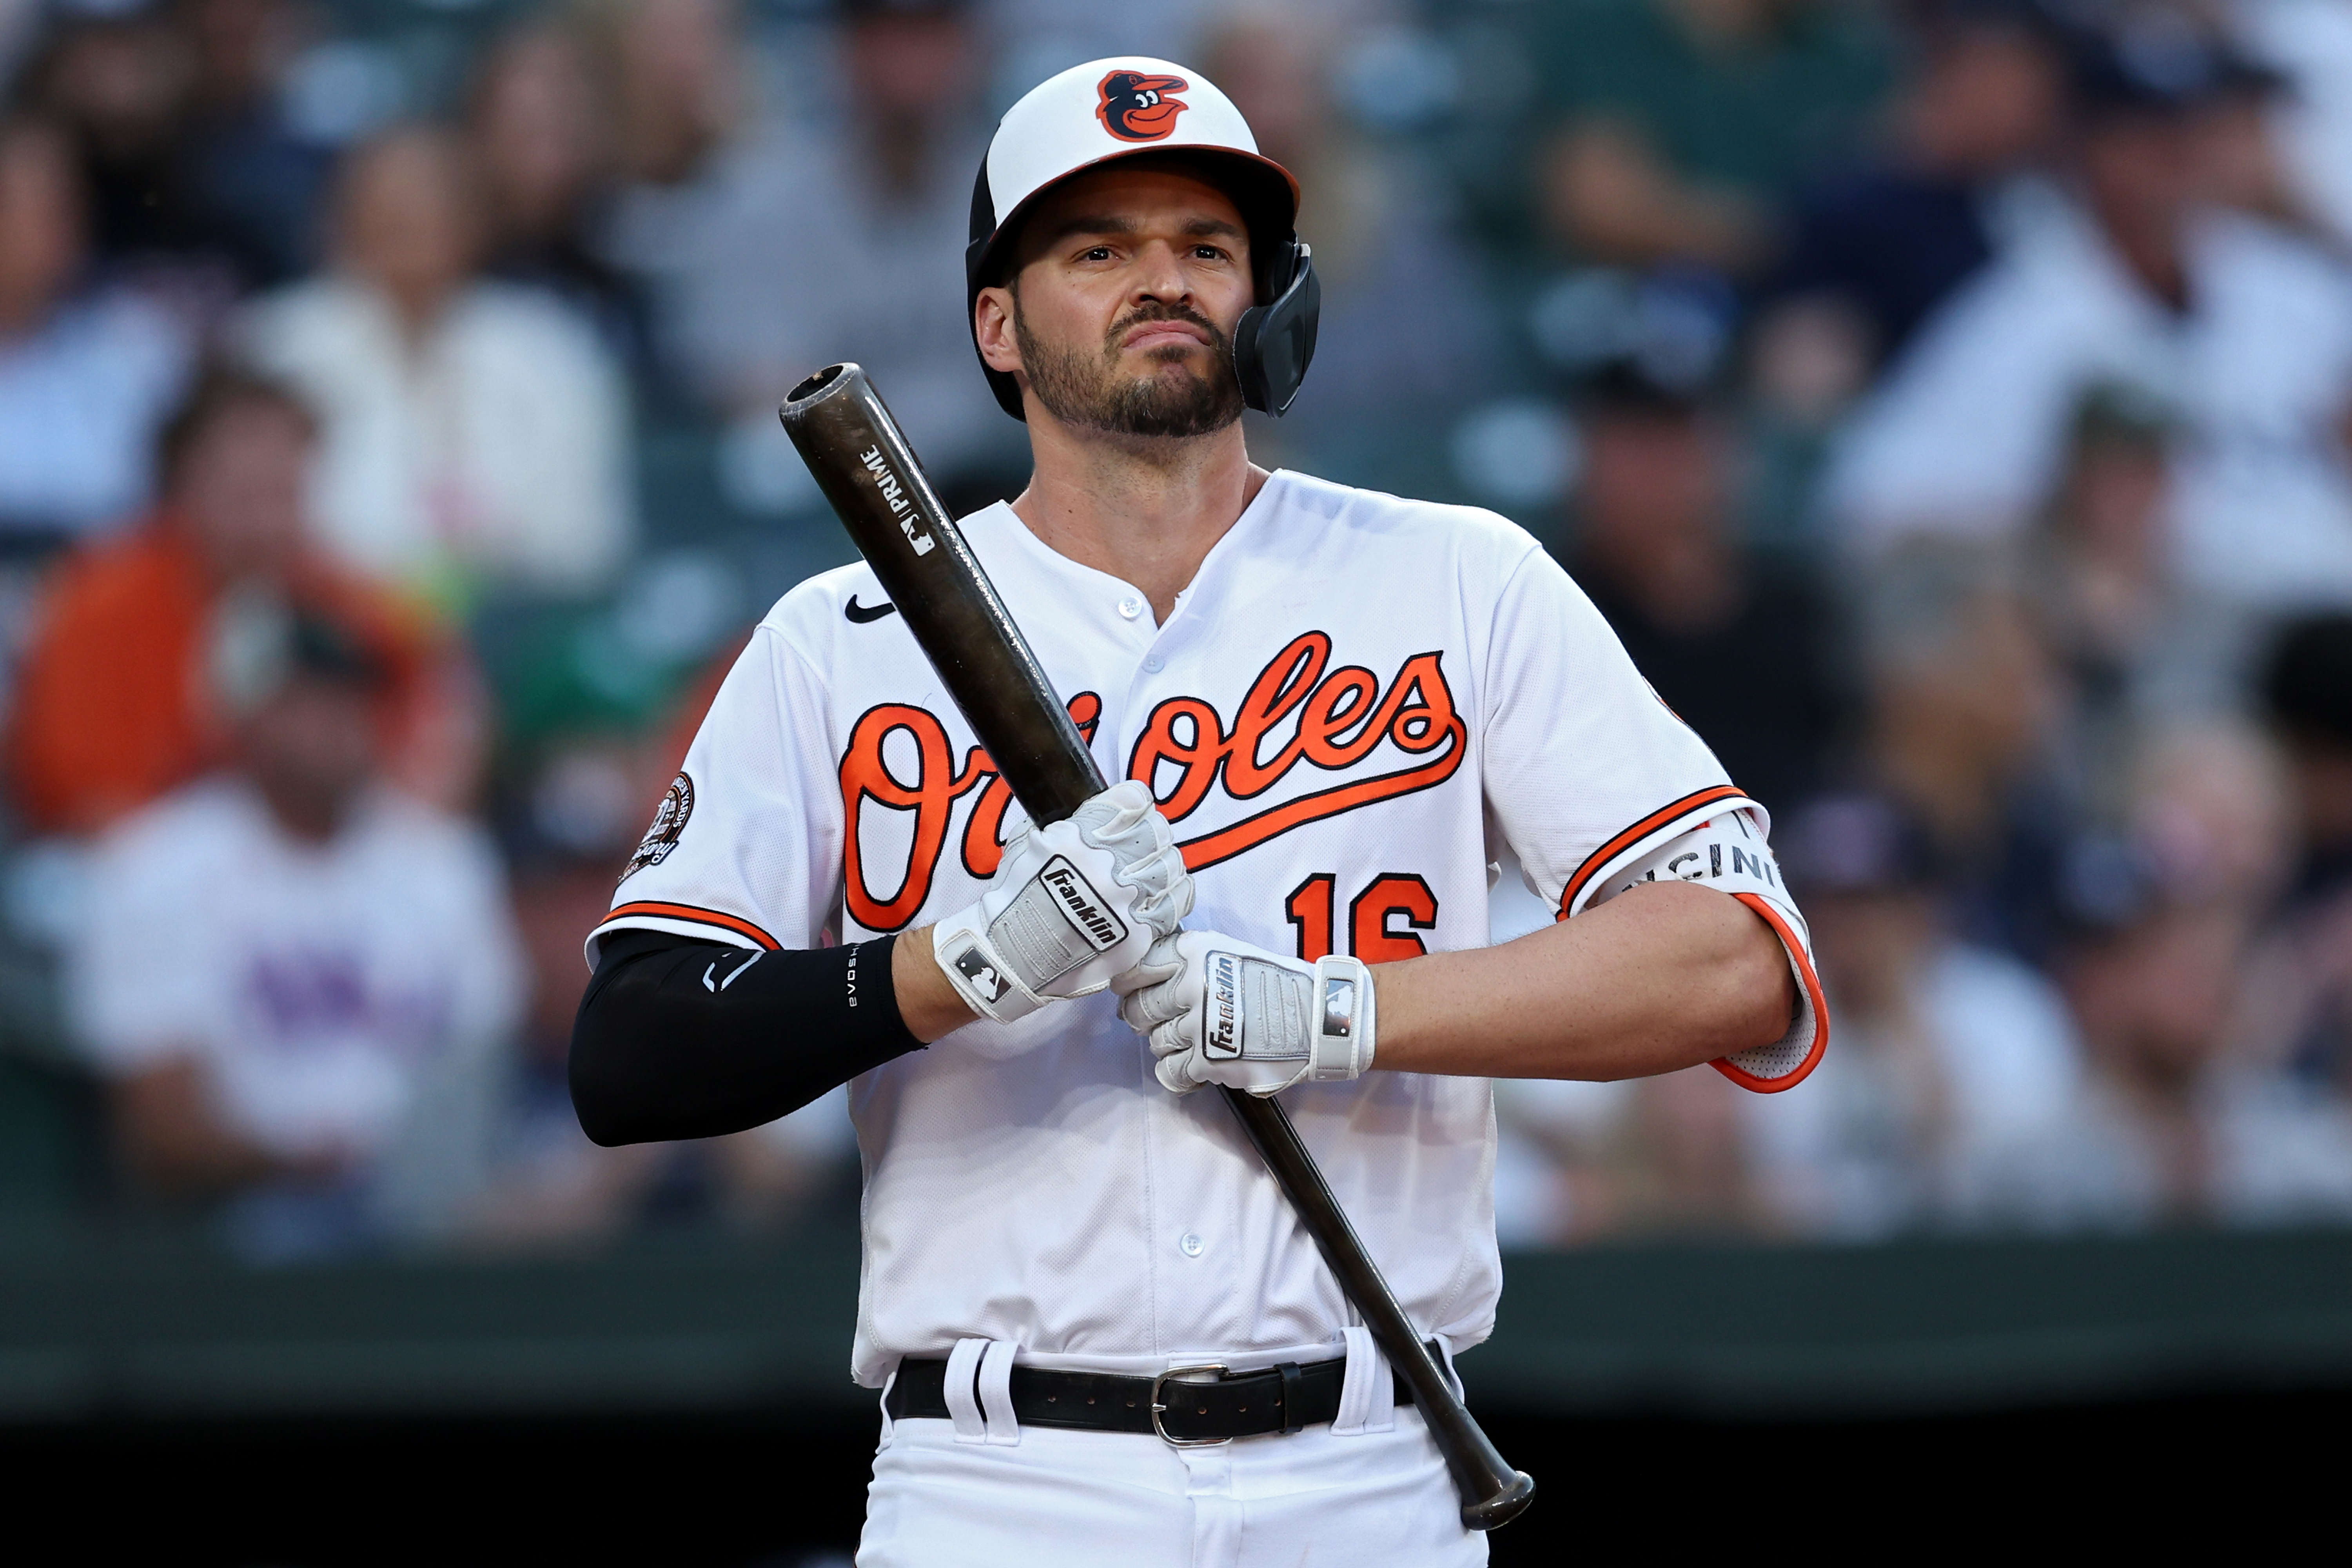 Trey Mancini expresses disappointment in not making All-Star Game